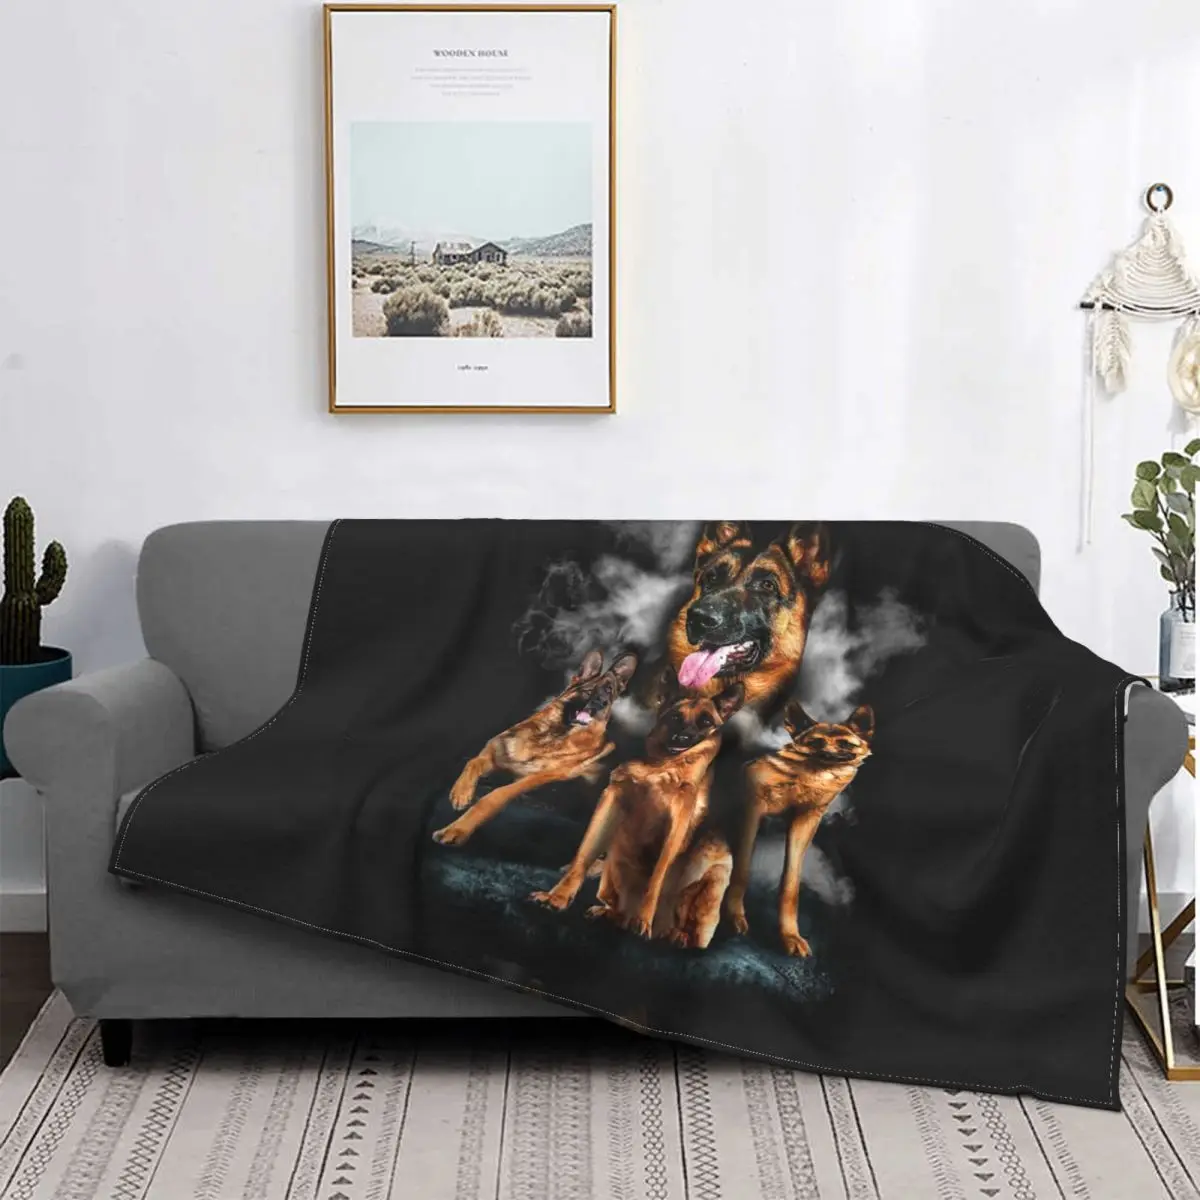 

Soft Bedspreads Bedding for Sofa Couch Bed Home Decor Dog Flannel Throw Bed Blankets Cozy Lightweight German Shepherd Blanket